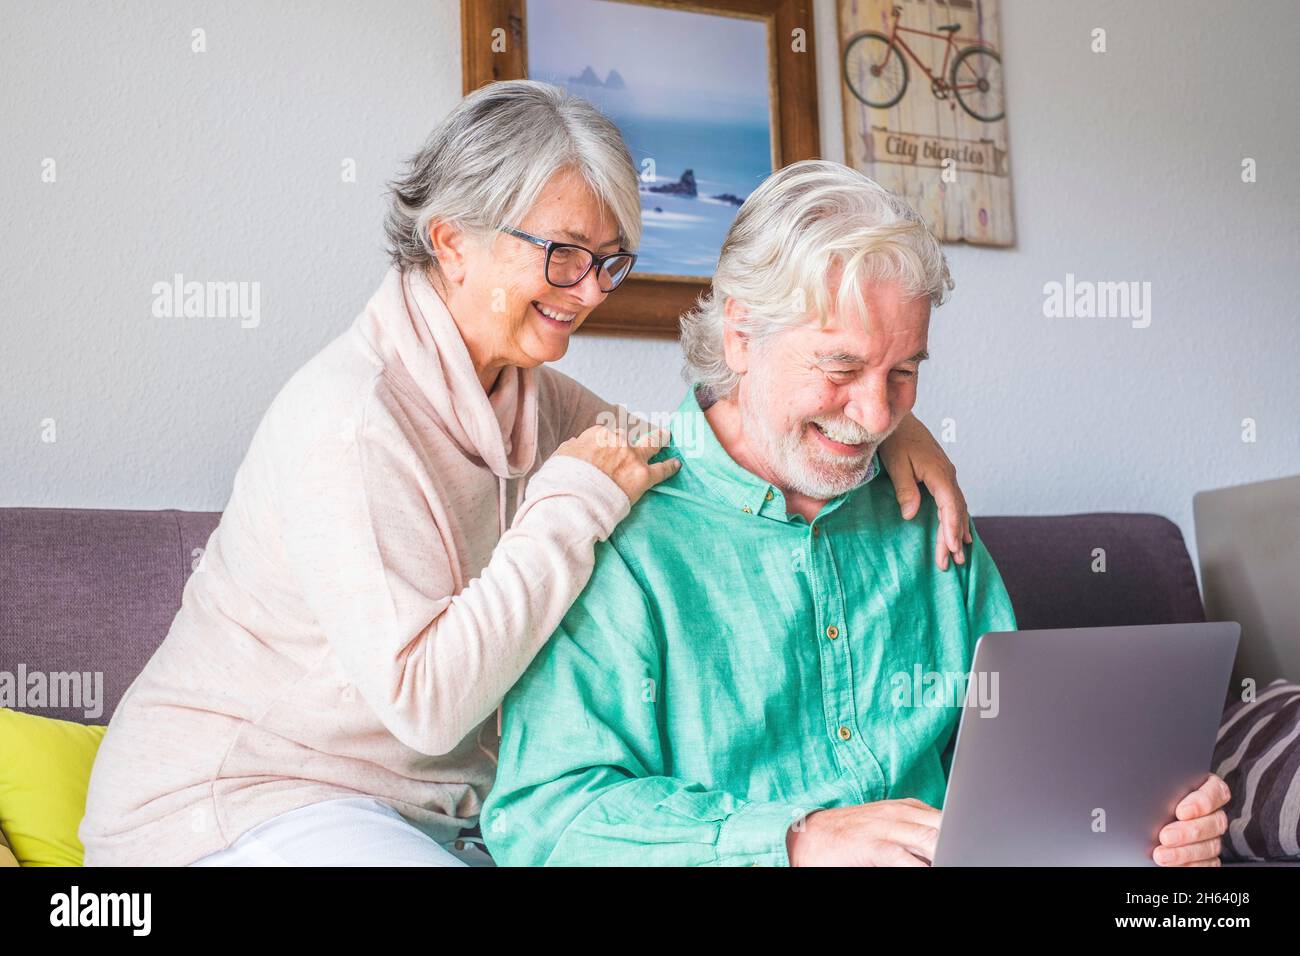 couple of two old and mature people at home using tablet together in sofa. senior use laptop having fun and enjoying looking at it. leisure and free time concept Stock Photo